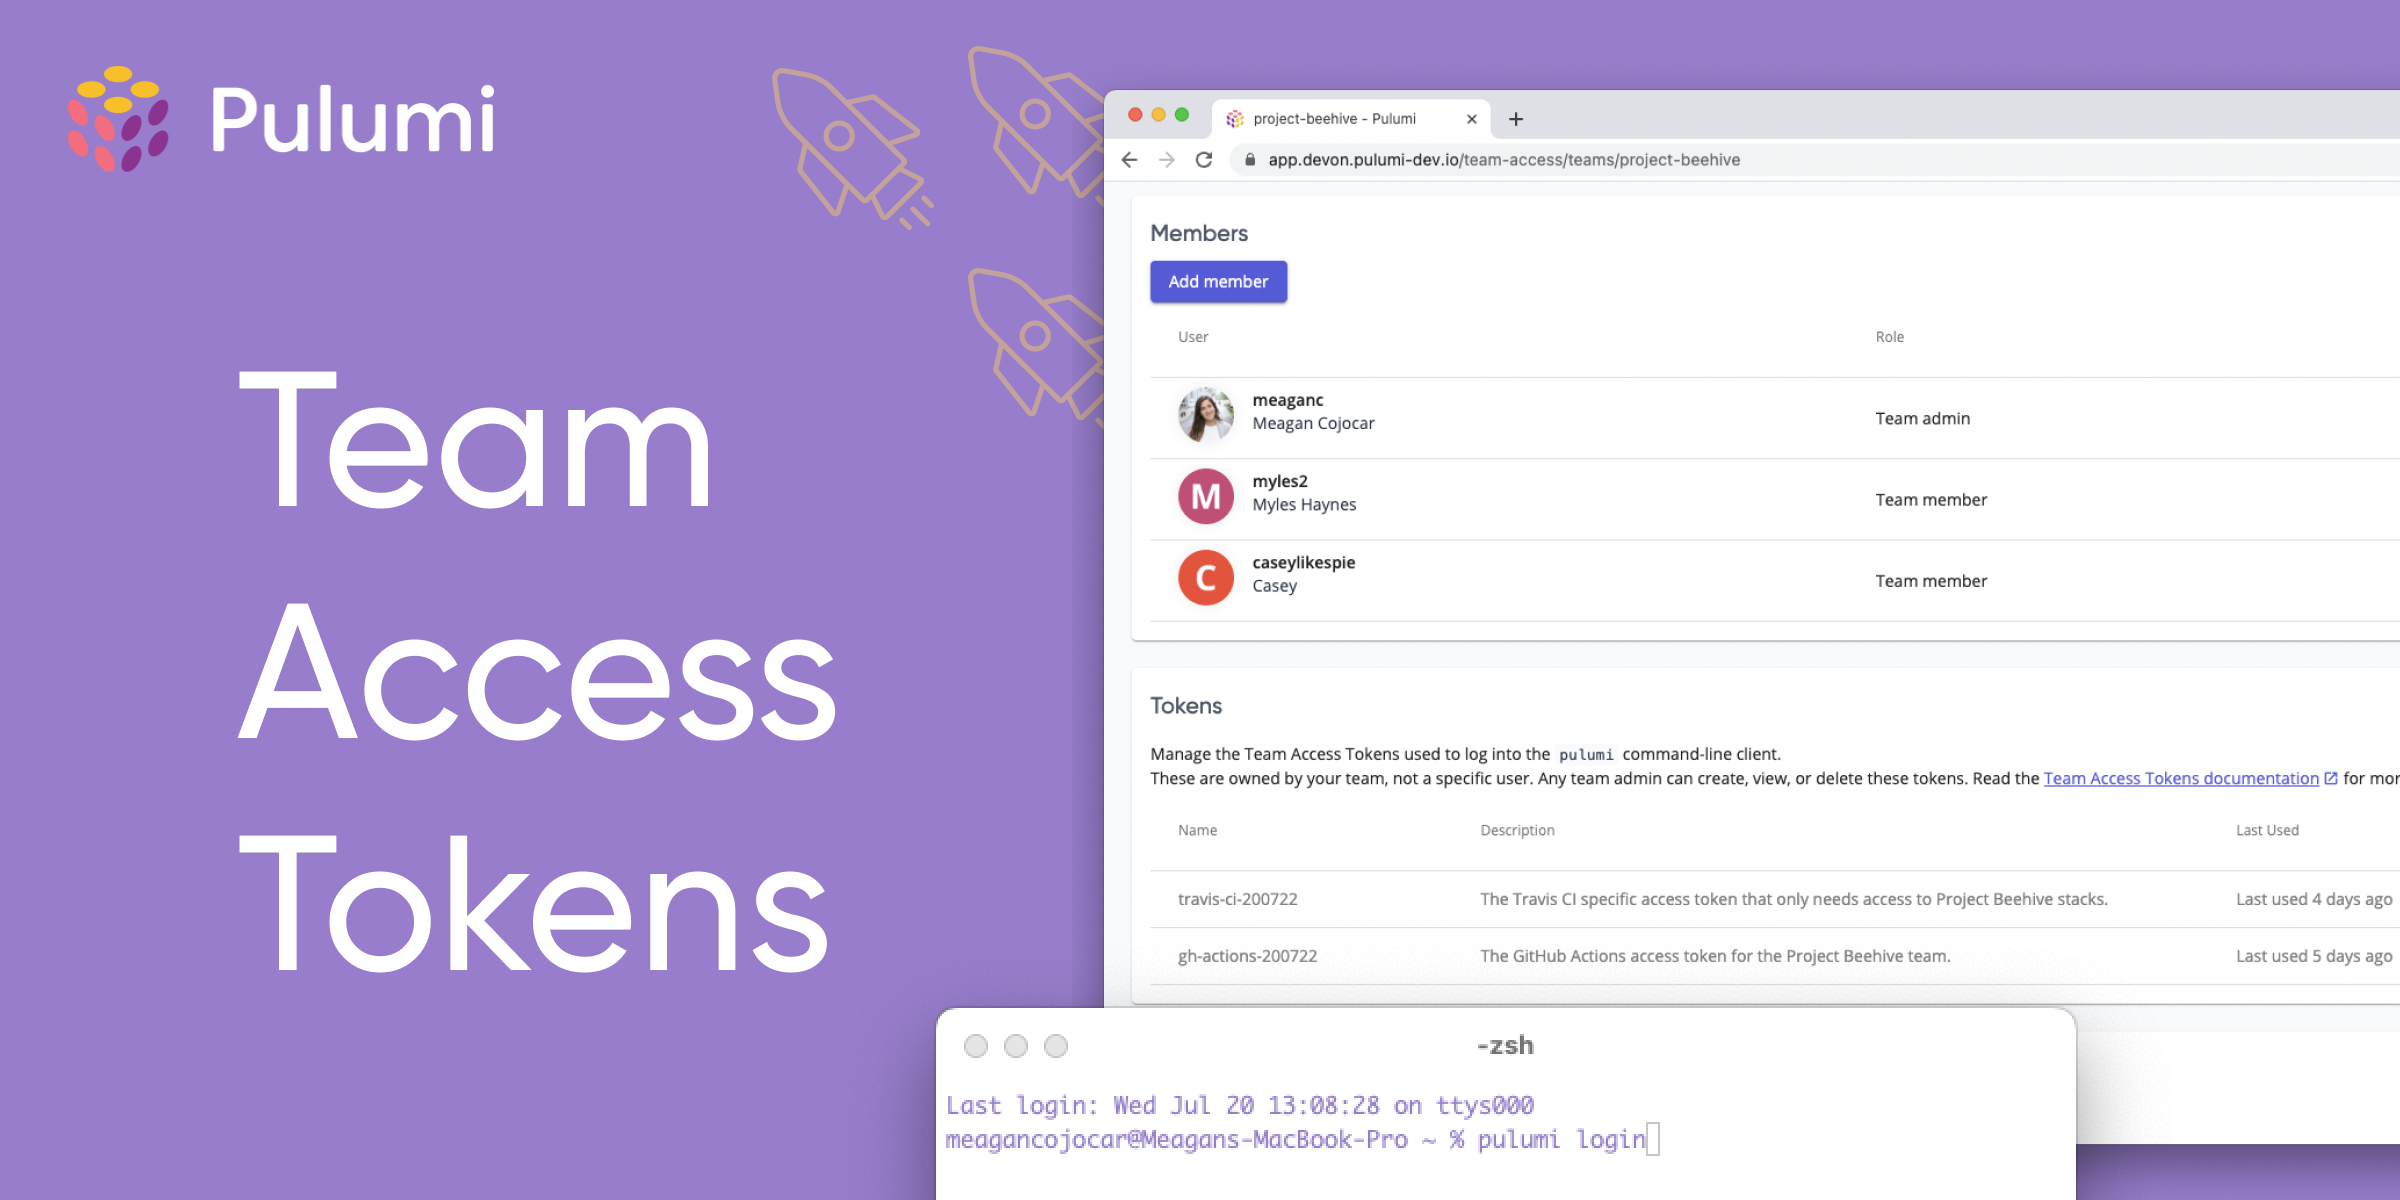 Announcing Team Access Tokens for the Pulumi Service